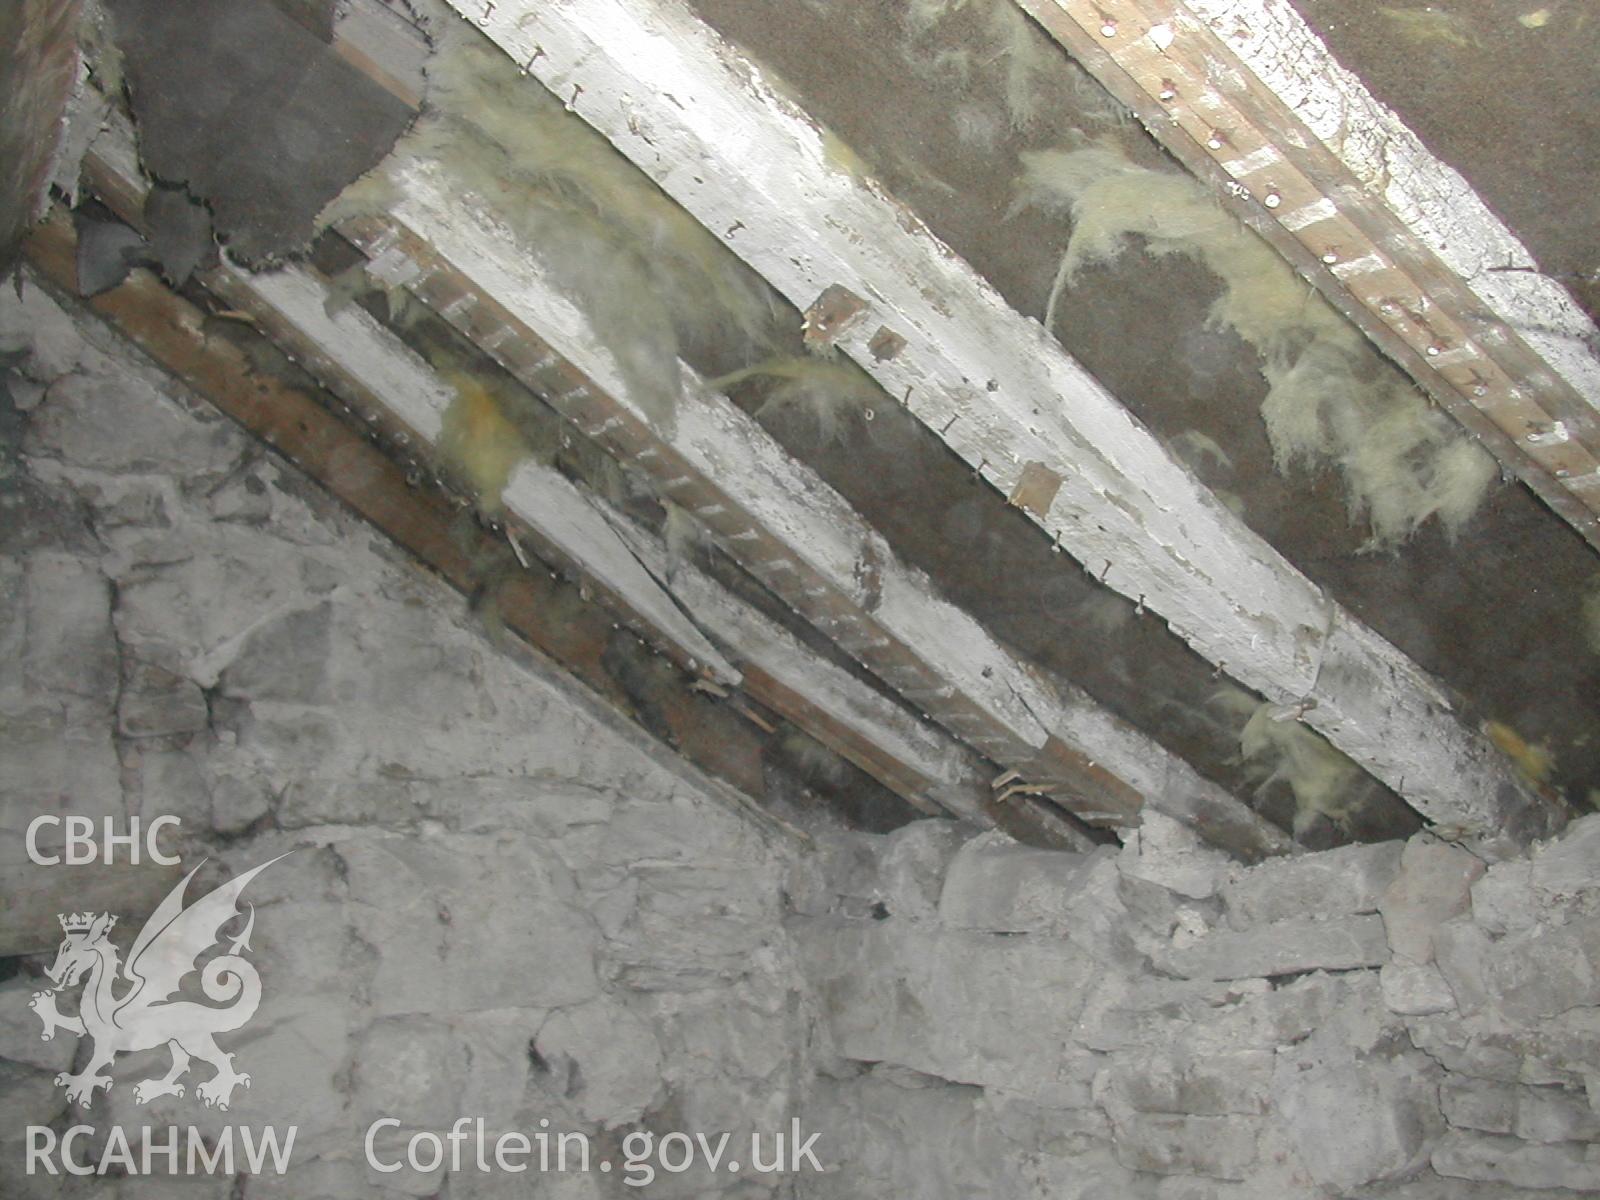 Colour photograph showing detailed view of attic ceiling at Rosacre, Gronant, Prestatyn. Unknown date. Donated by the Conservation Department of Flintshire County Council, in advance of relocation to new offices.